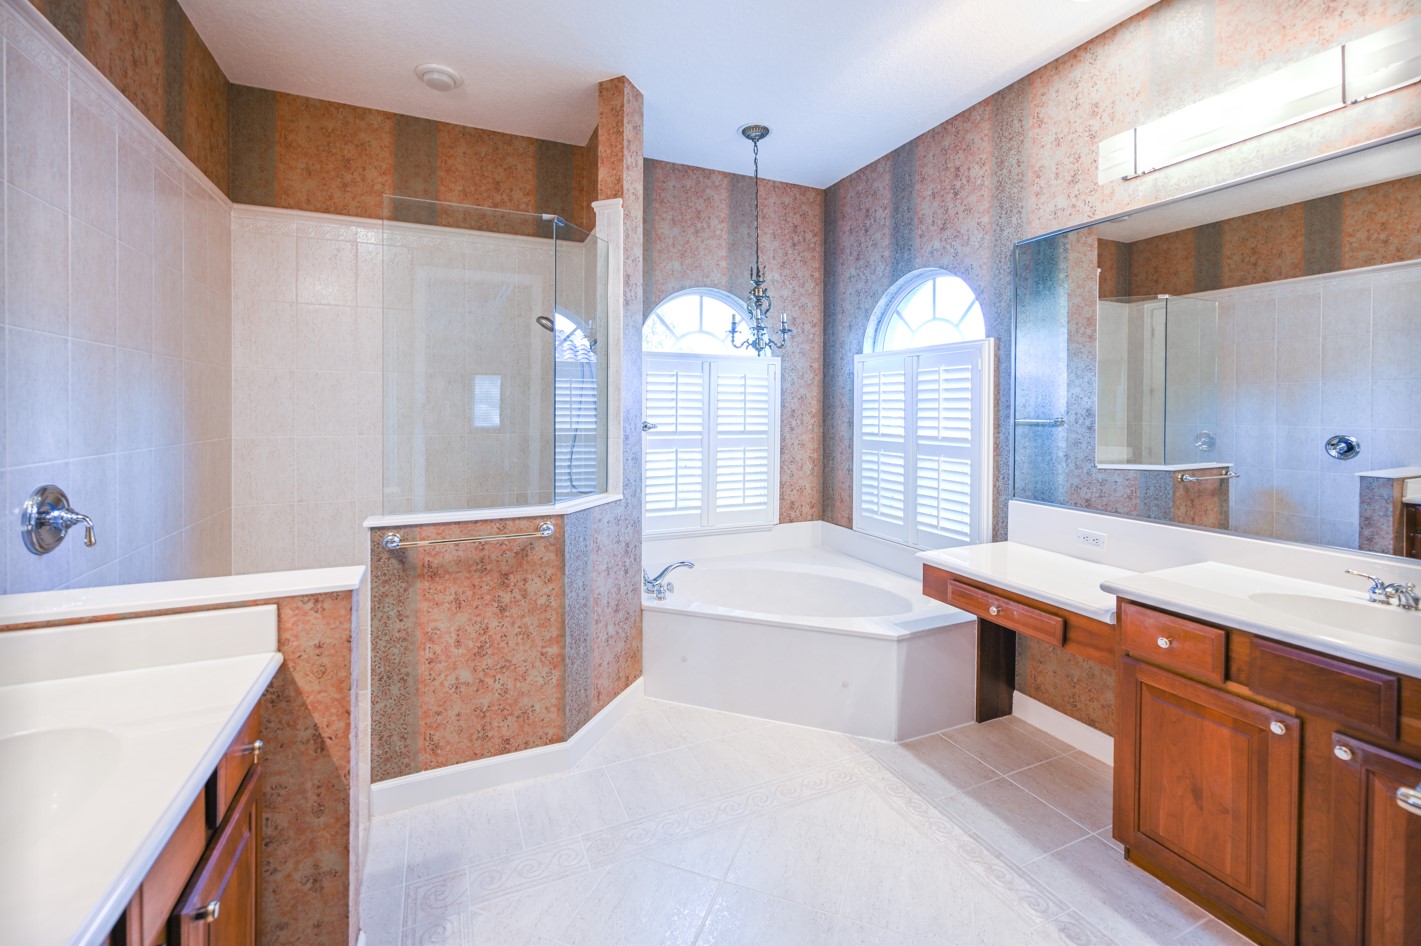 Bathroom with cherry wallpaper and cabinets